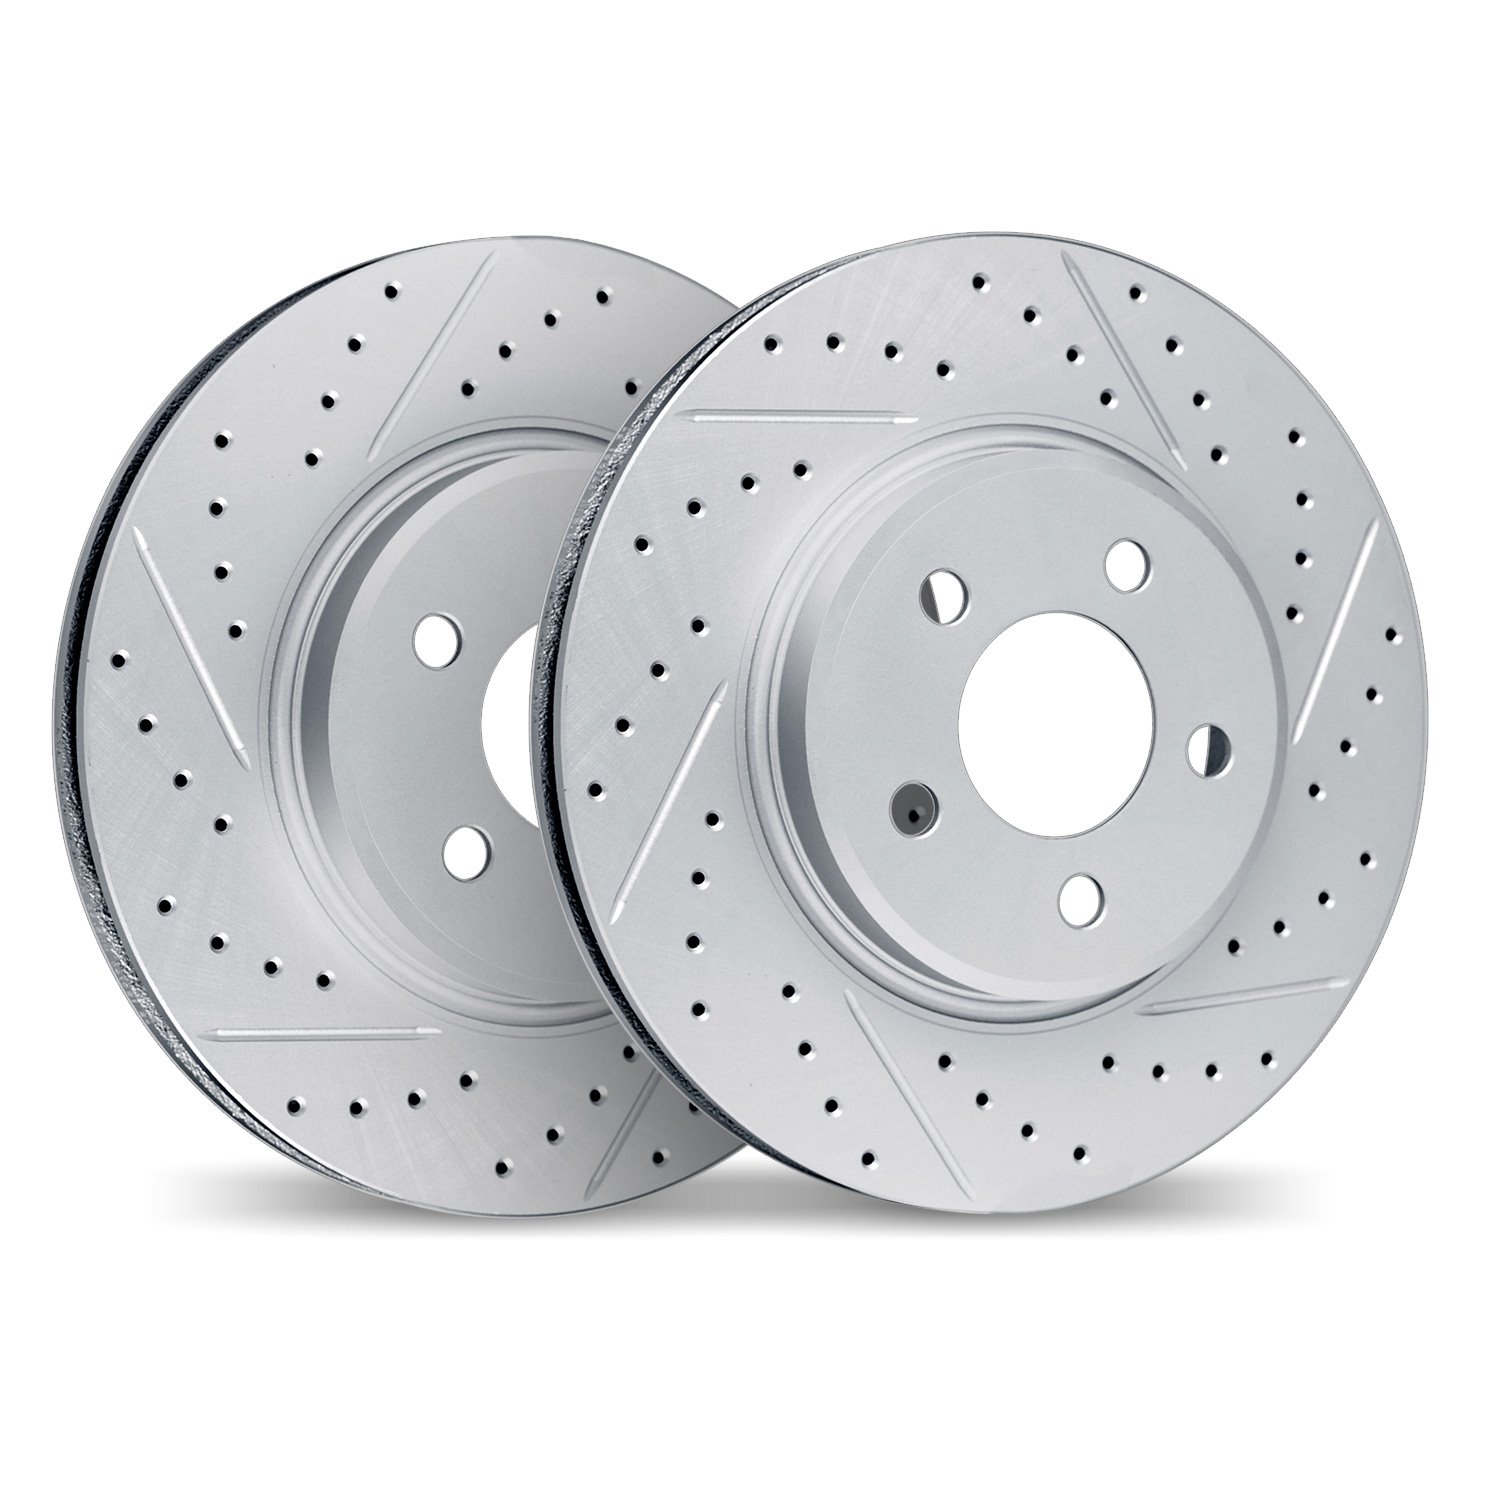 2002-76036 Geoperformance Drilled/Slotted Brake Rotors, 2005-2015 Lexus/Toyota/Scion, Position: Front